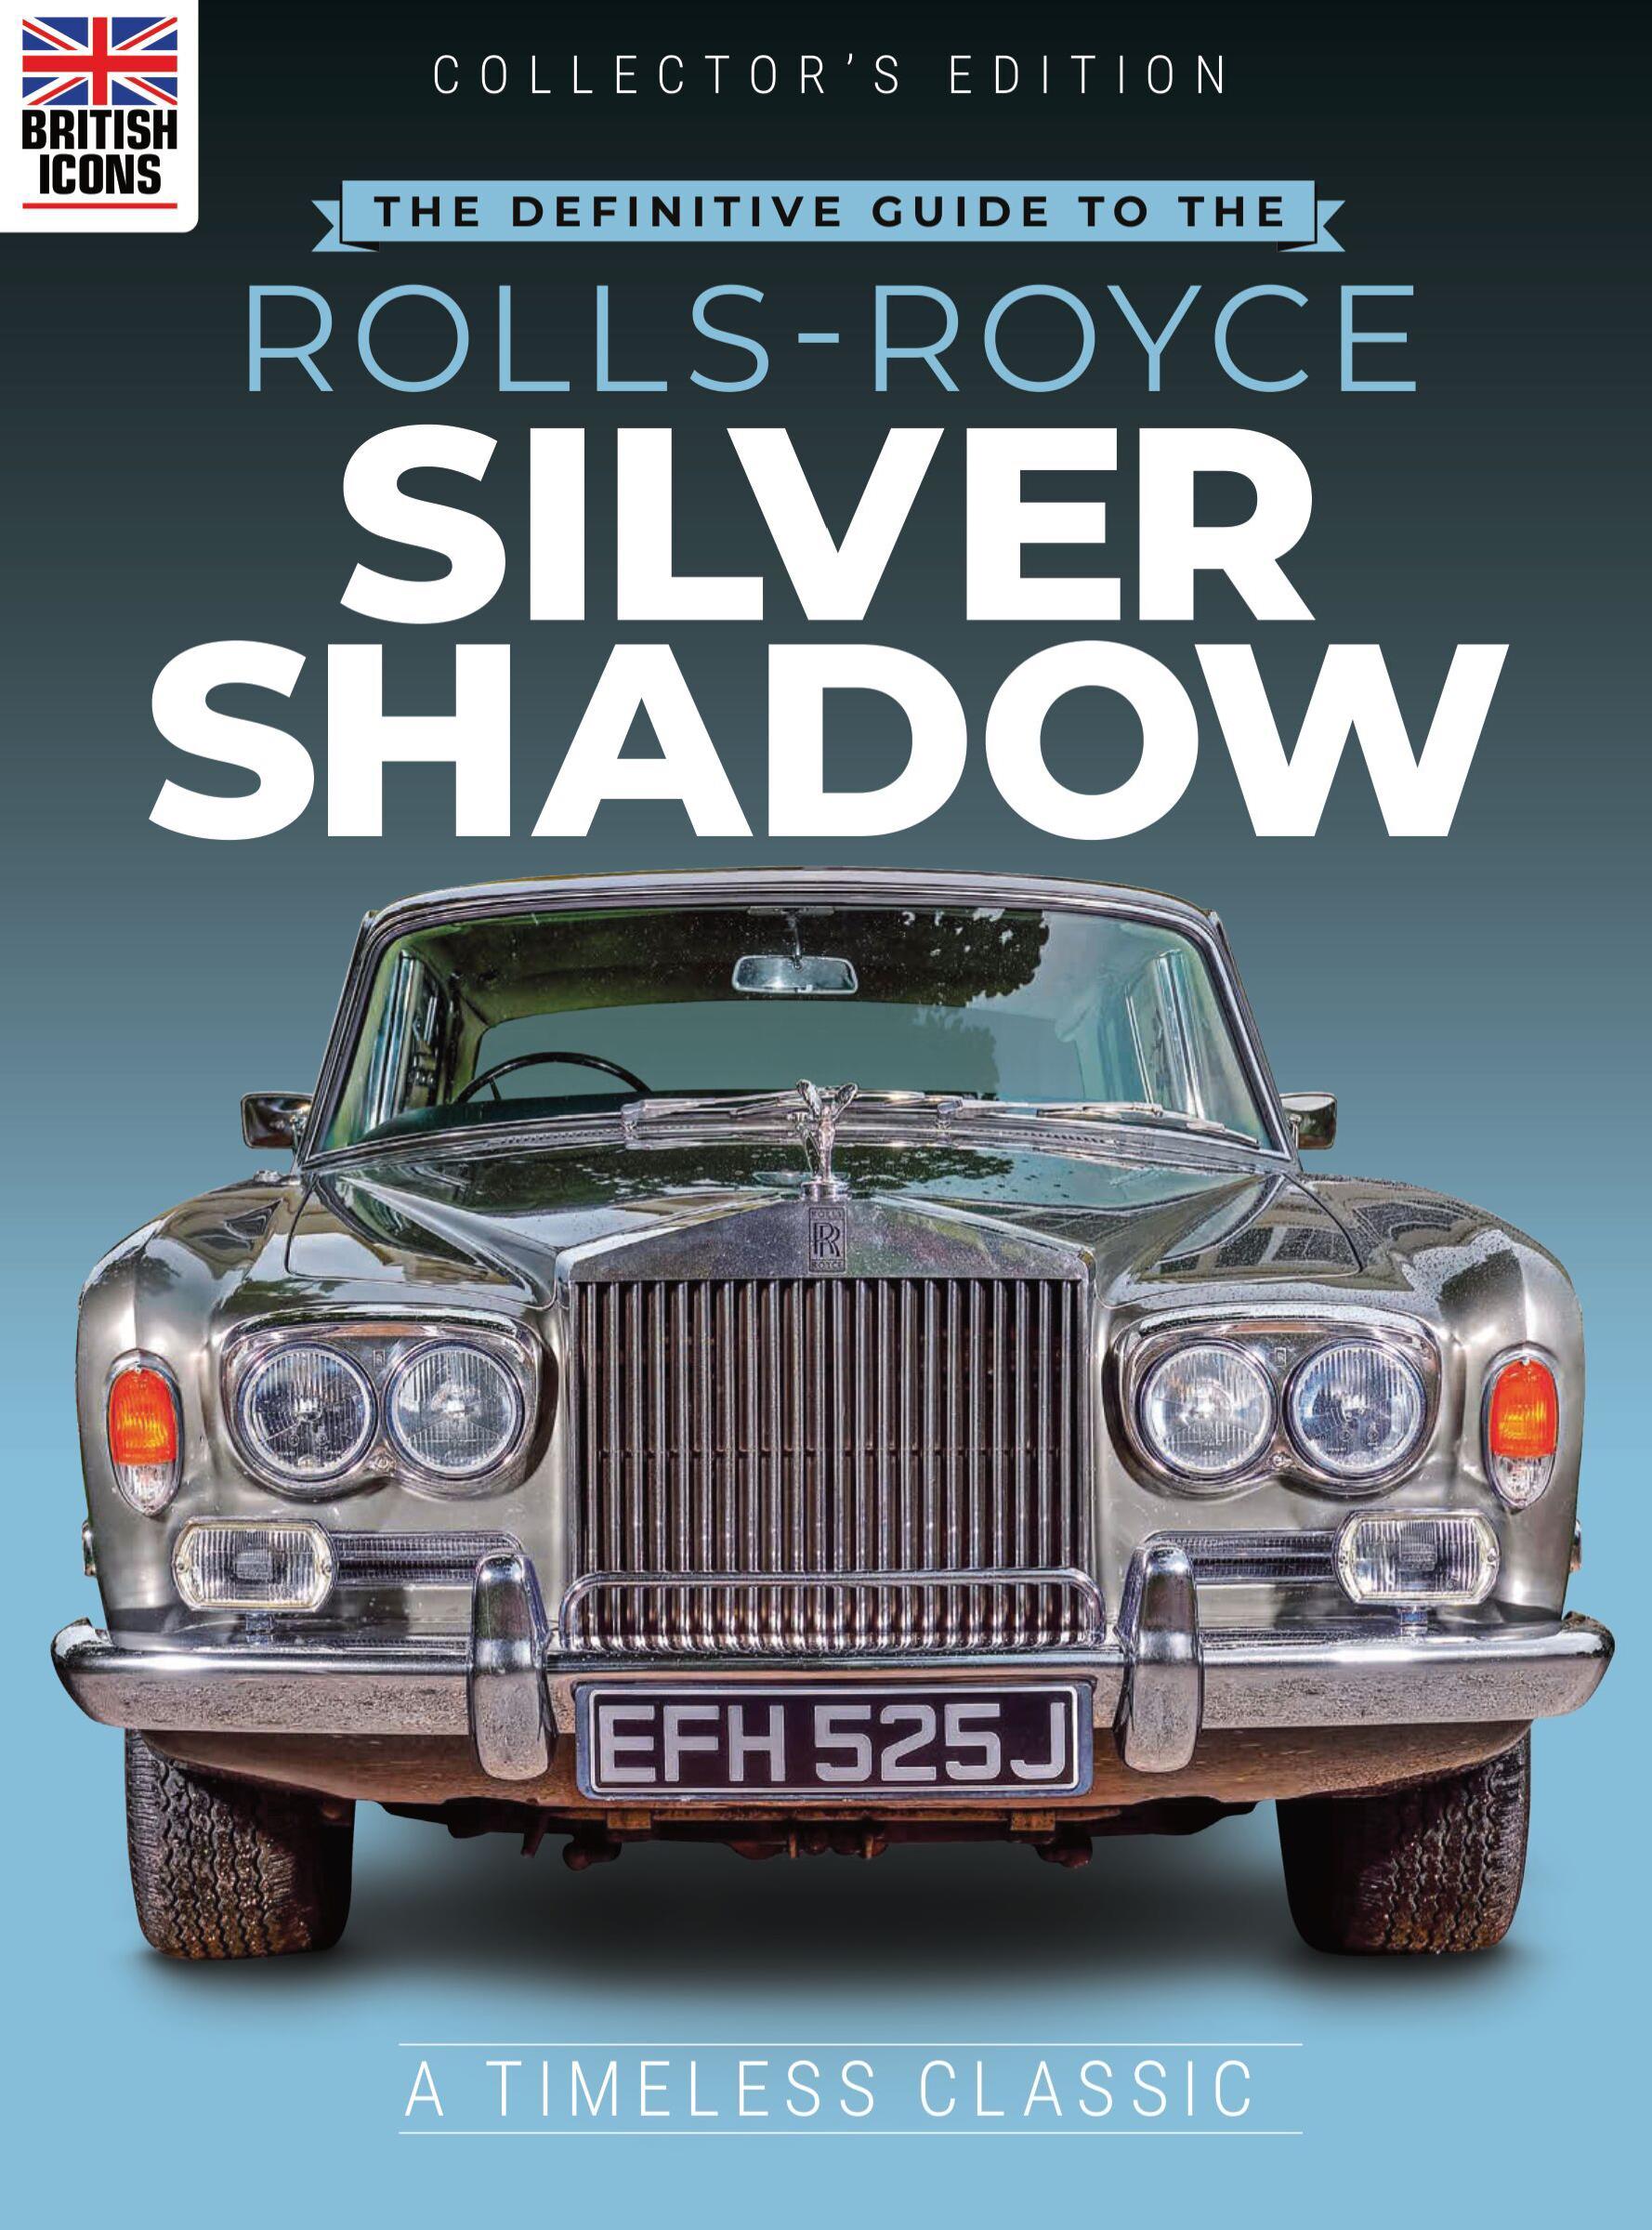 Журнал The Definitive Guide to the Rolls-Royce Silver Shadow